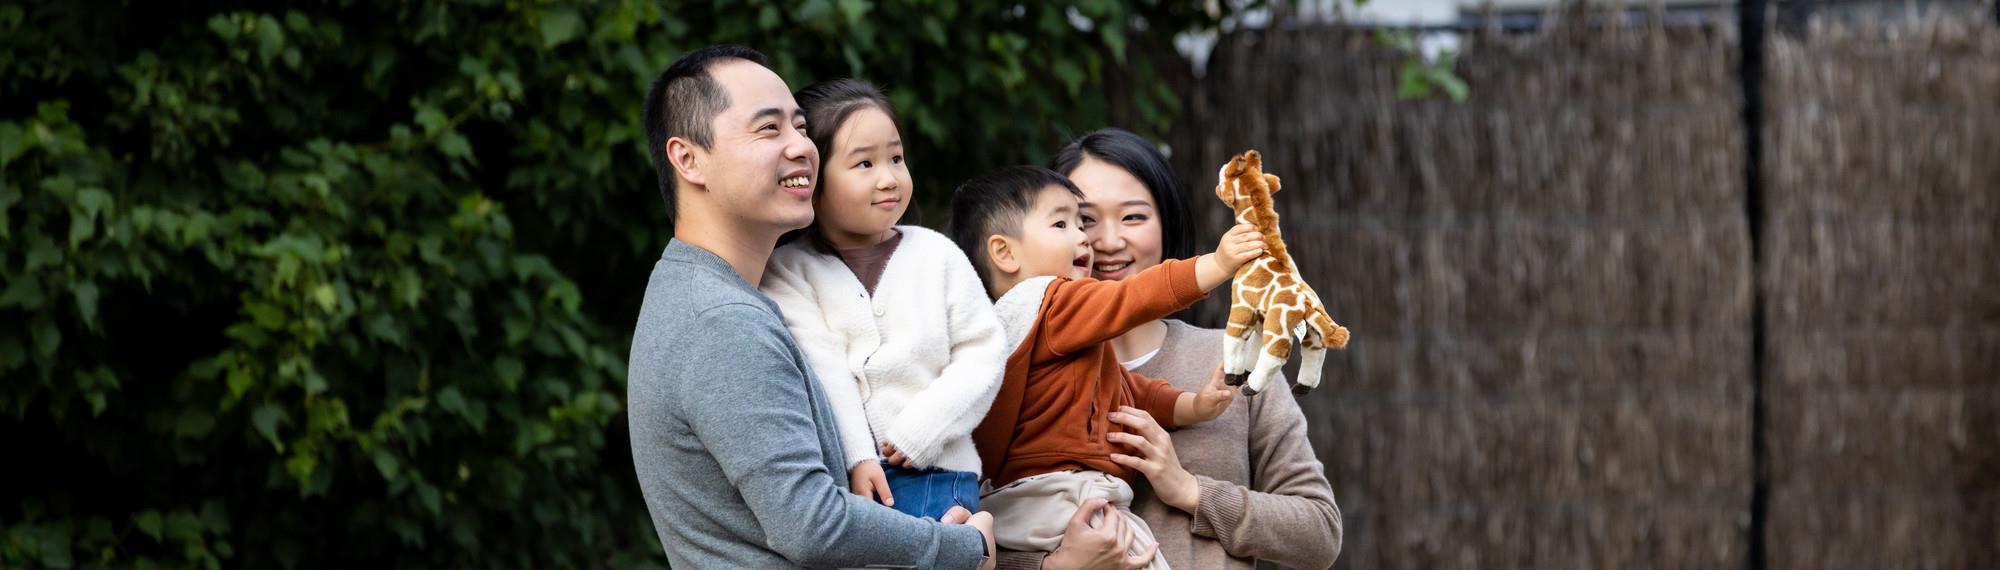 Family of two kids looking at giraffe and smiling. Young boy is holding out the giraffe plush toys